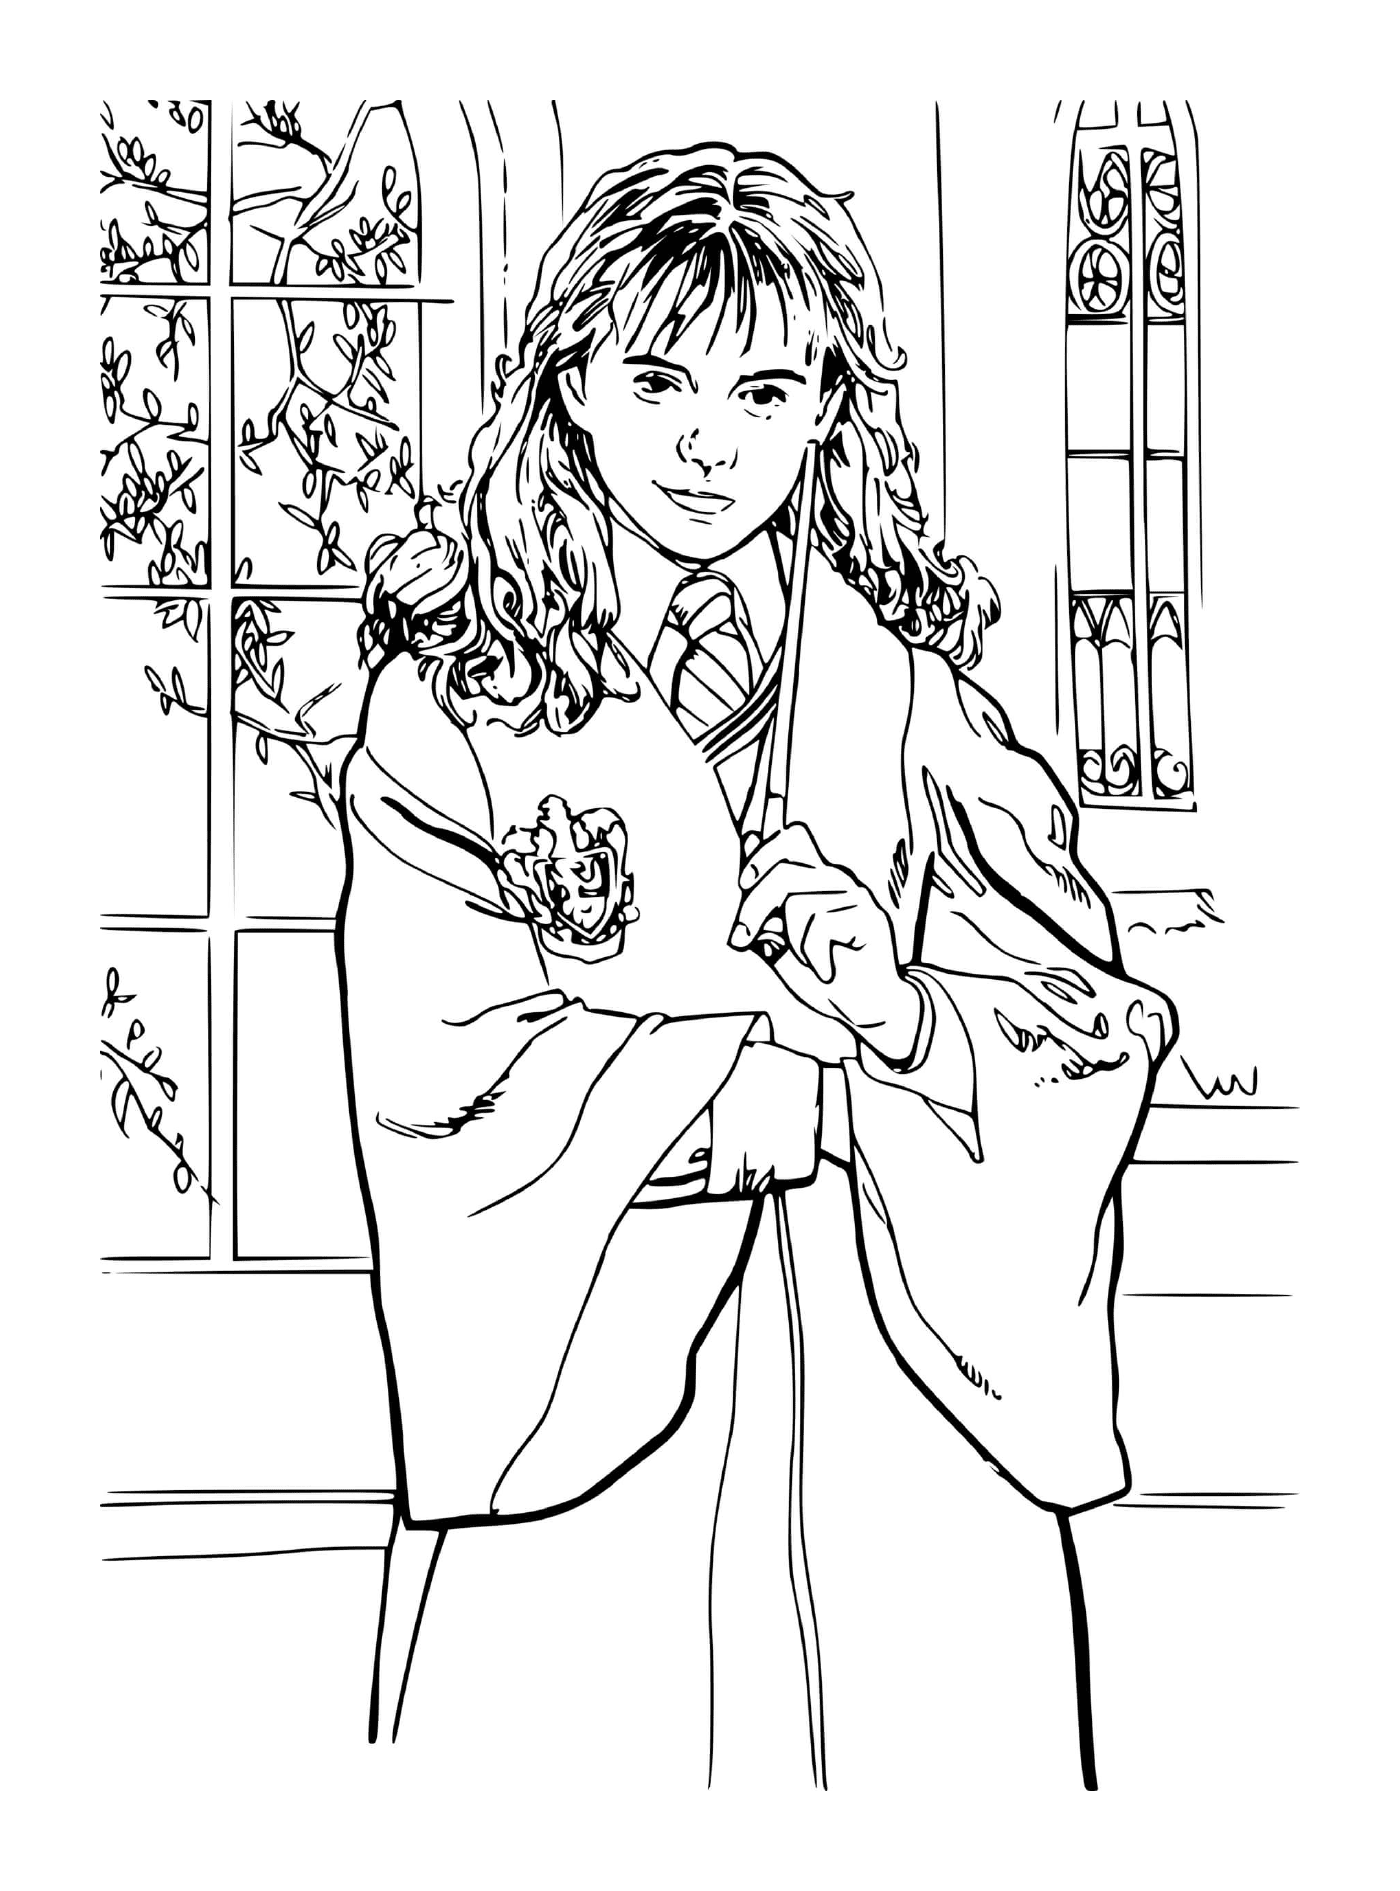  Hermione and her magic wand 